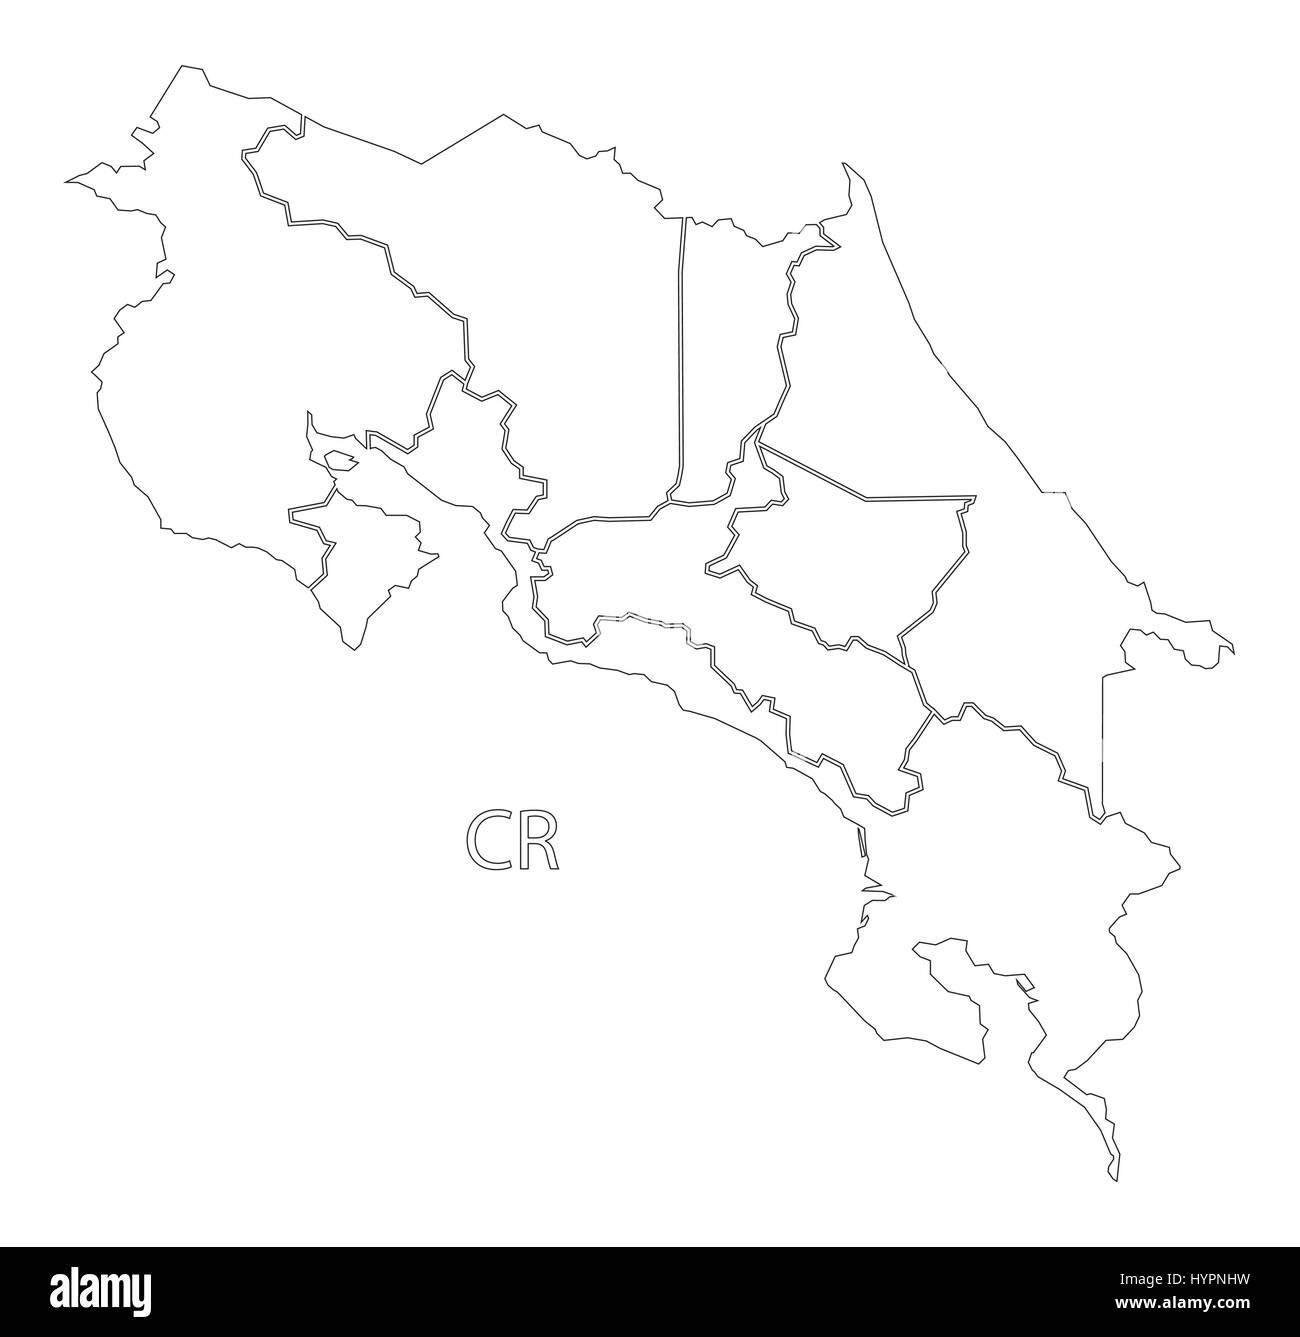 Costa Rica outline silhouette map illustration with provinces Stock ...